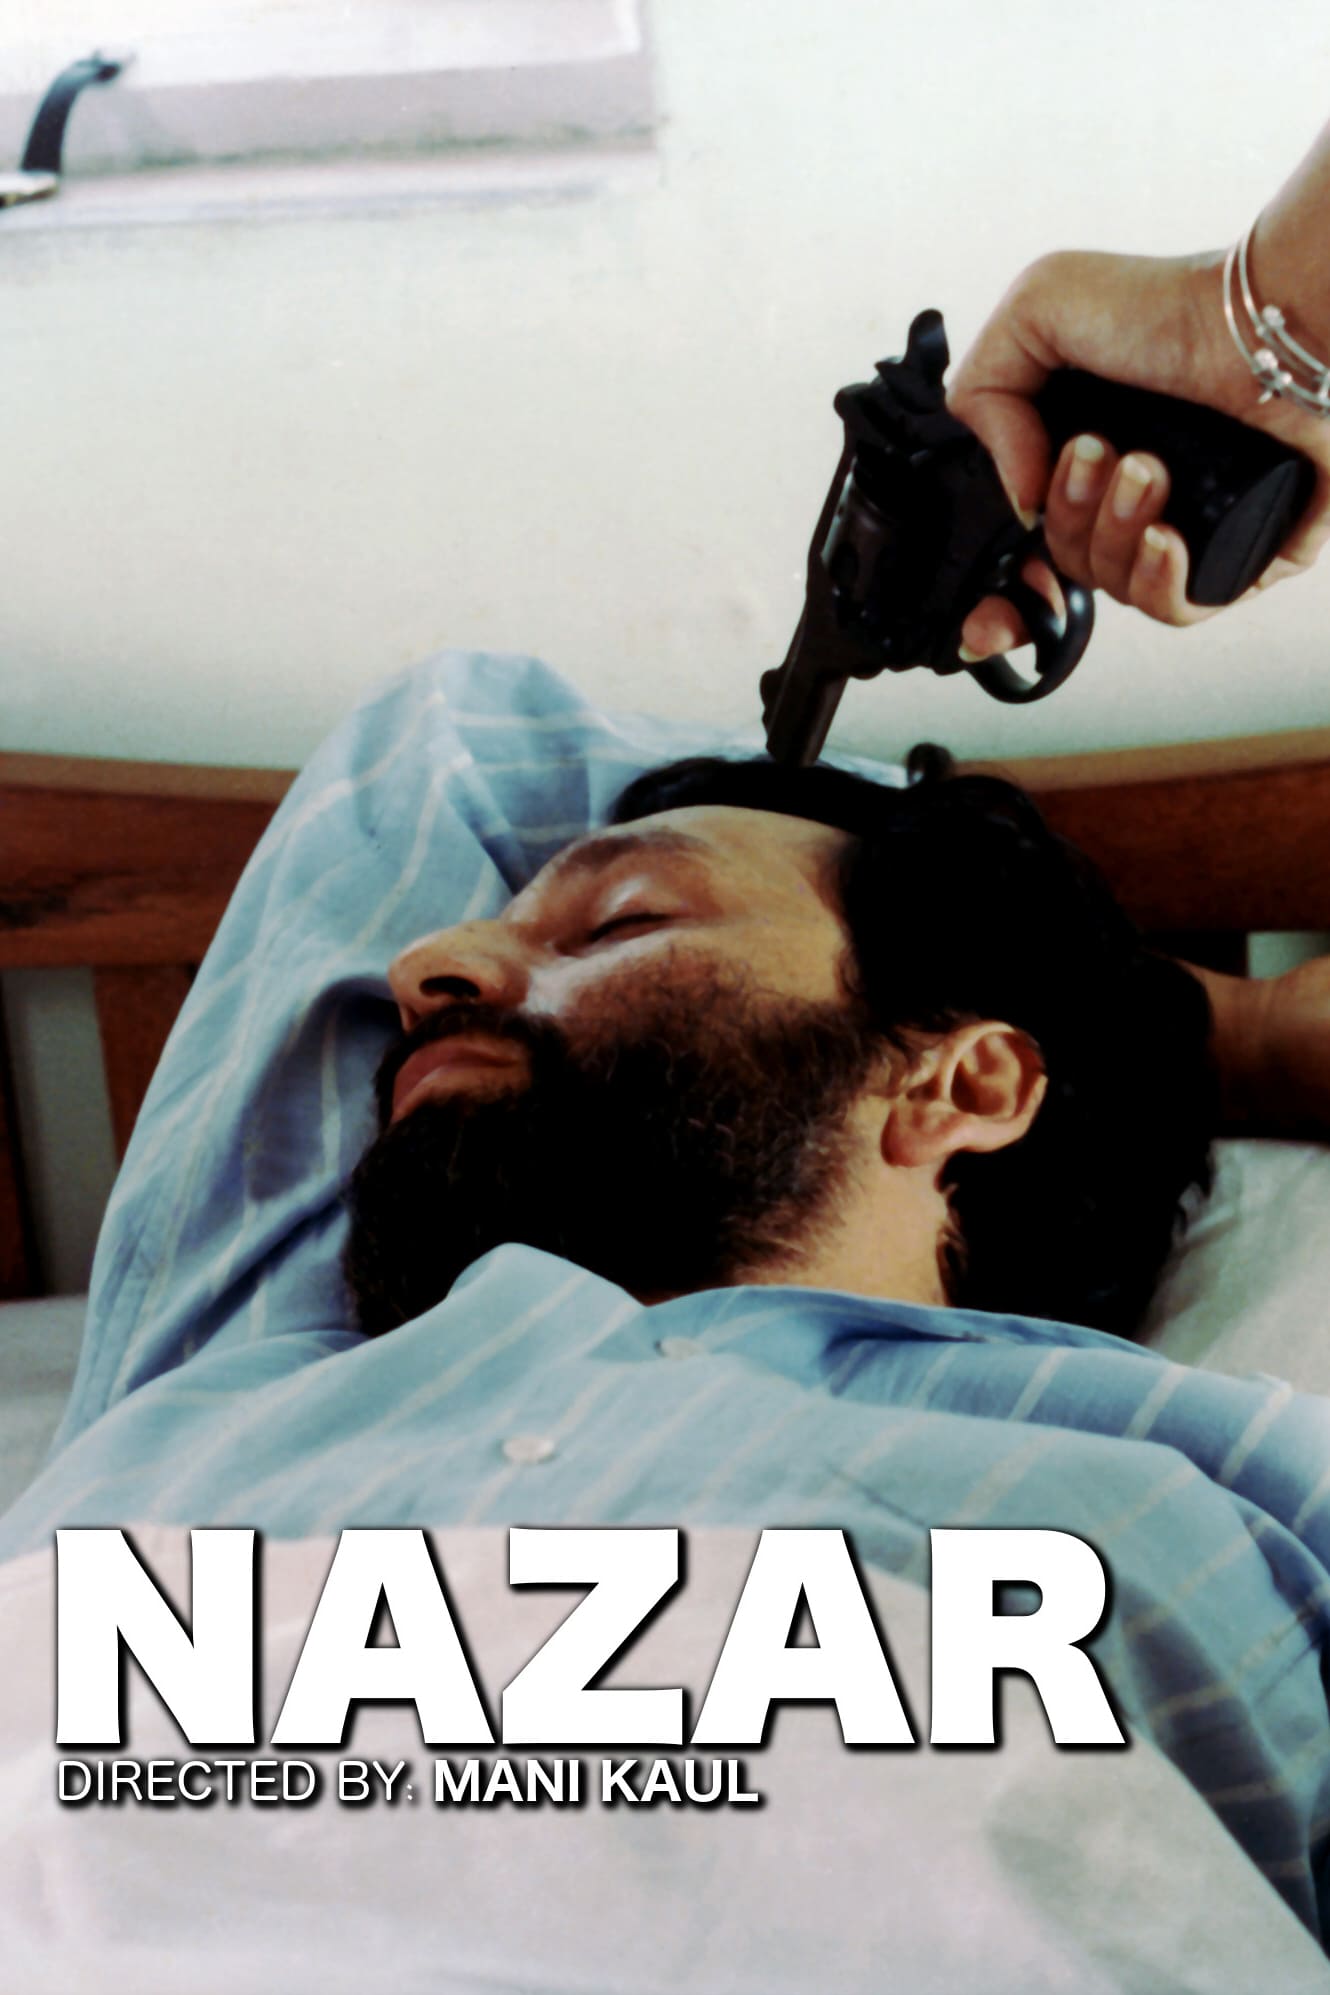 Poster for the movie "Nazar"